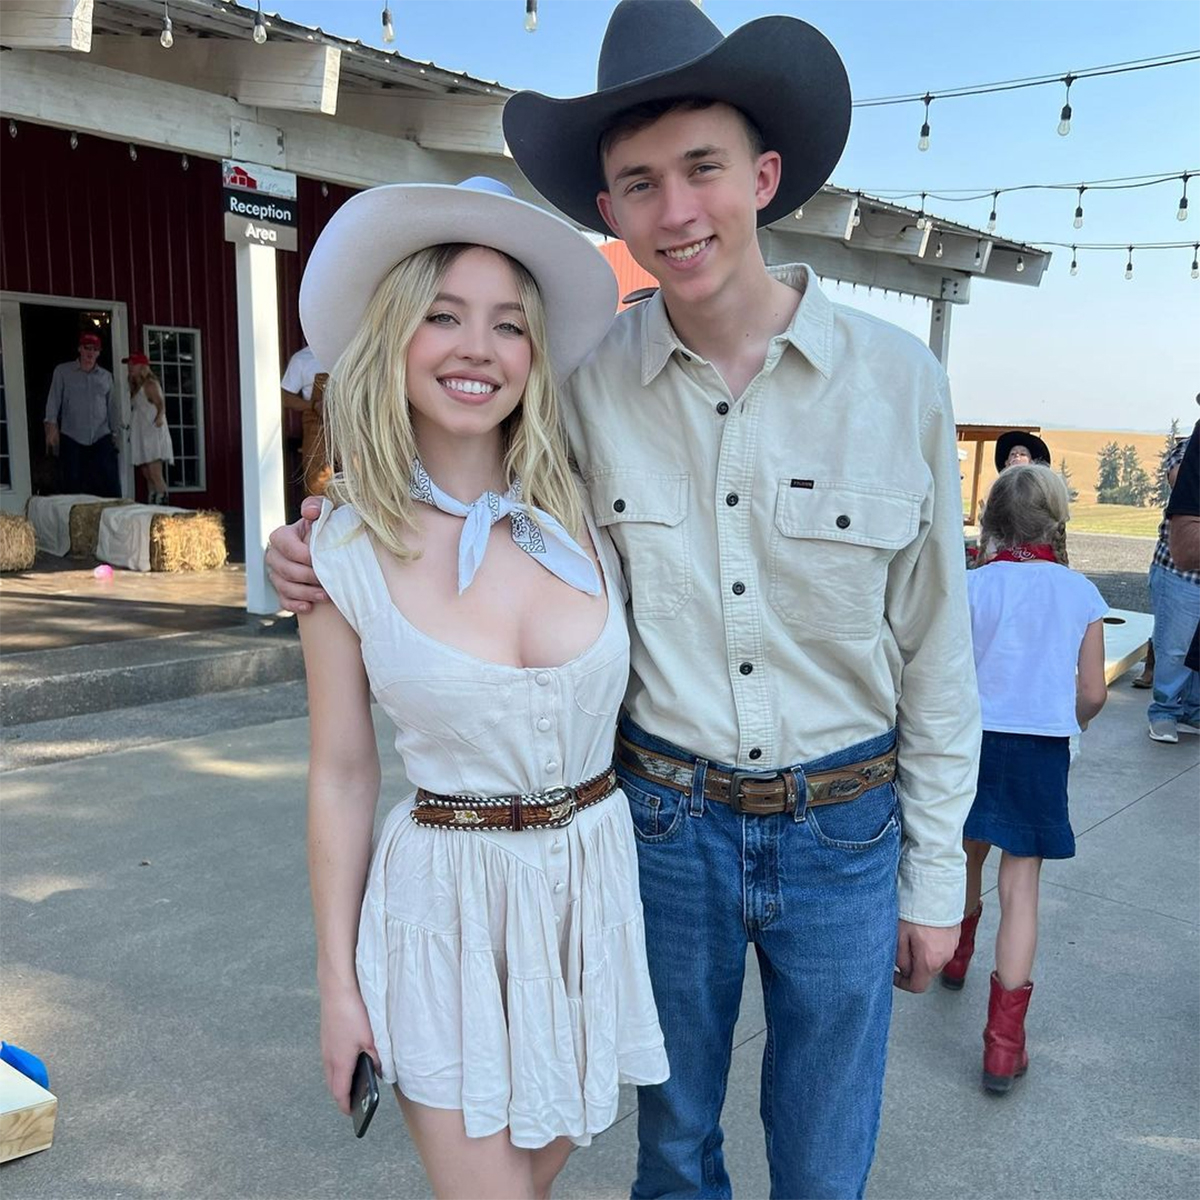 Sydney Sweeney Responds to Controversy Over Mom's 60th Birthday "Hoedown" Party Pics